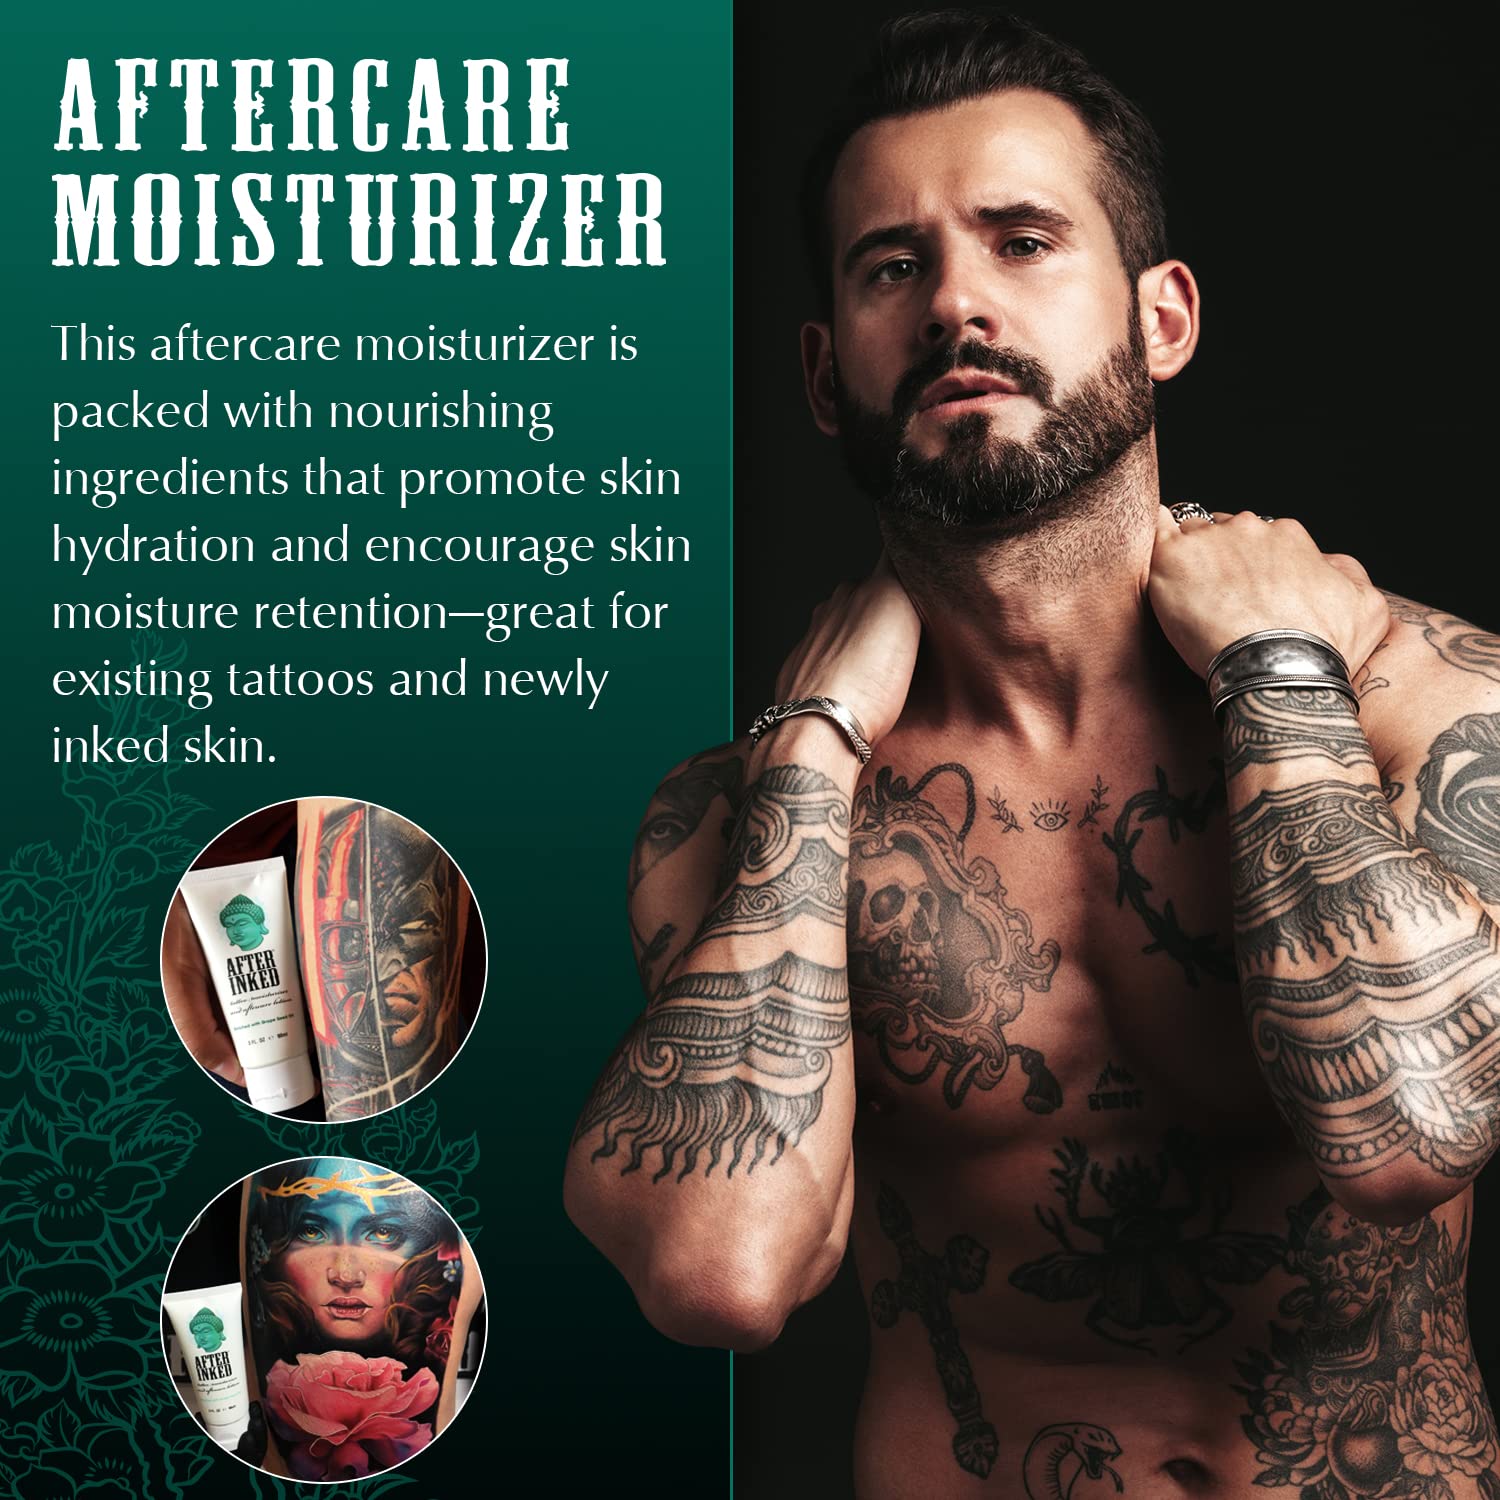 After Inked Tattoo Moisturizing Lotion Plus & Piercing Aftercare Spray Bundle - Essential Tattoo Supplies, Premium Skincare Products